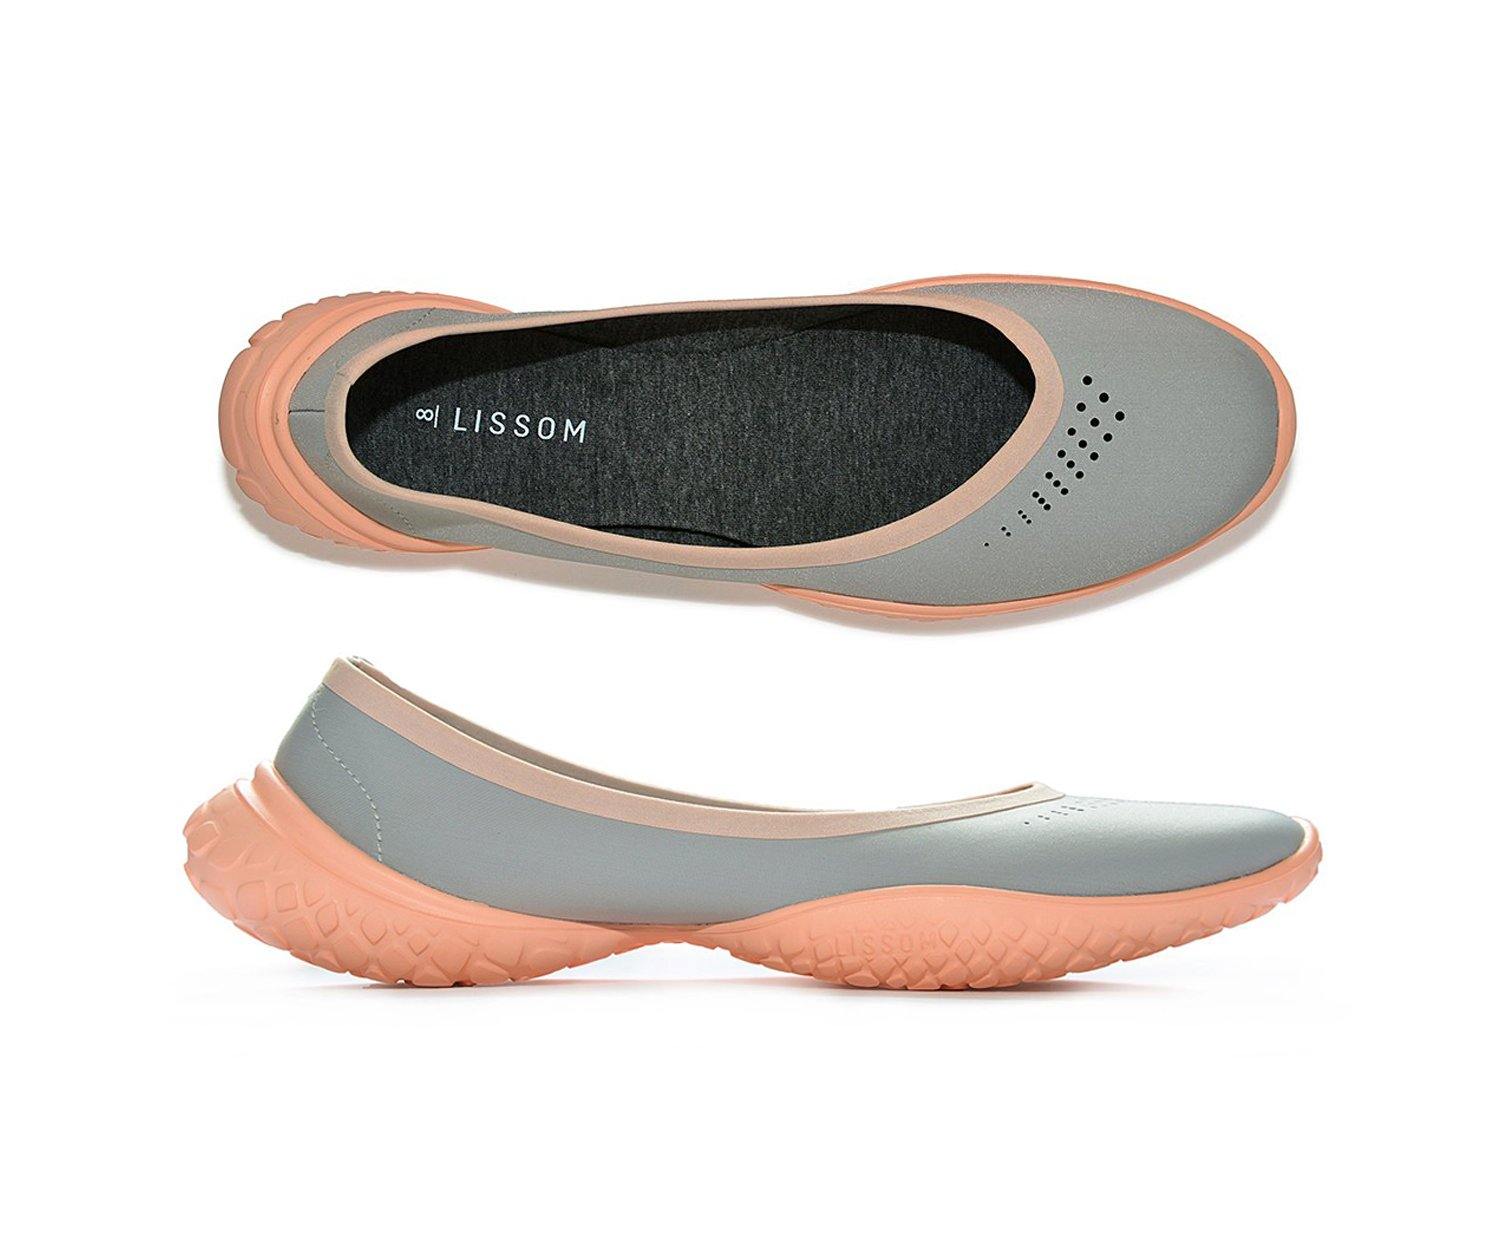 Fly-Knit Memory Foam Slip-on Ballerina Shoes - Coral